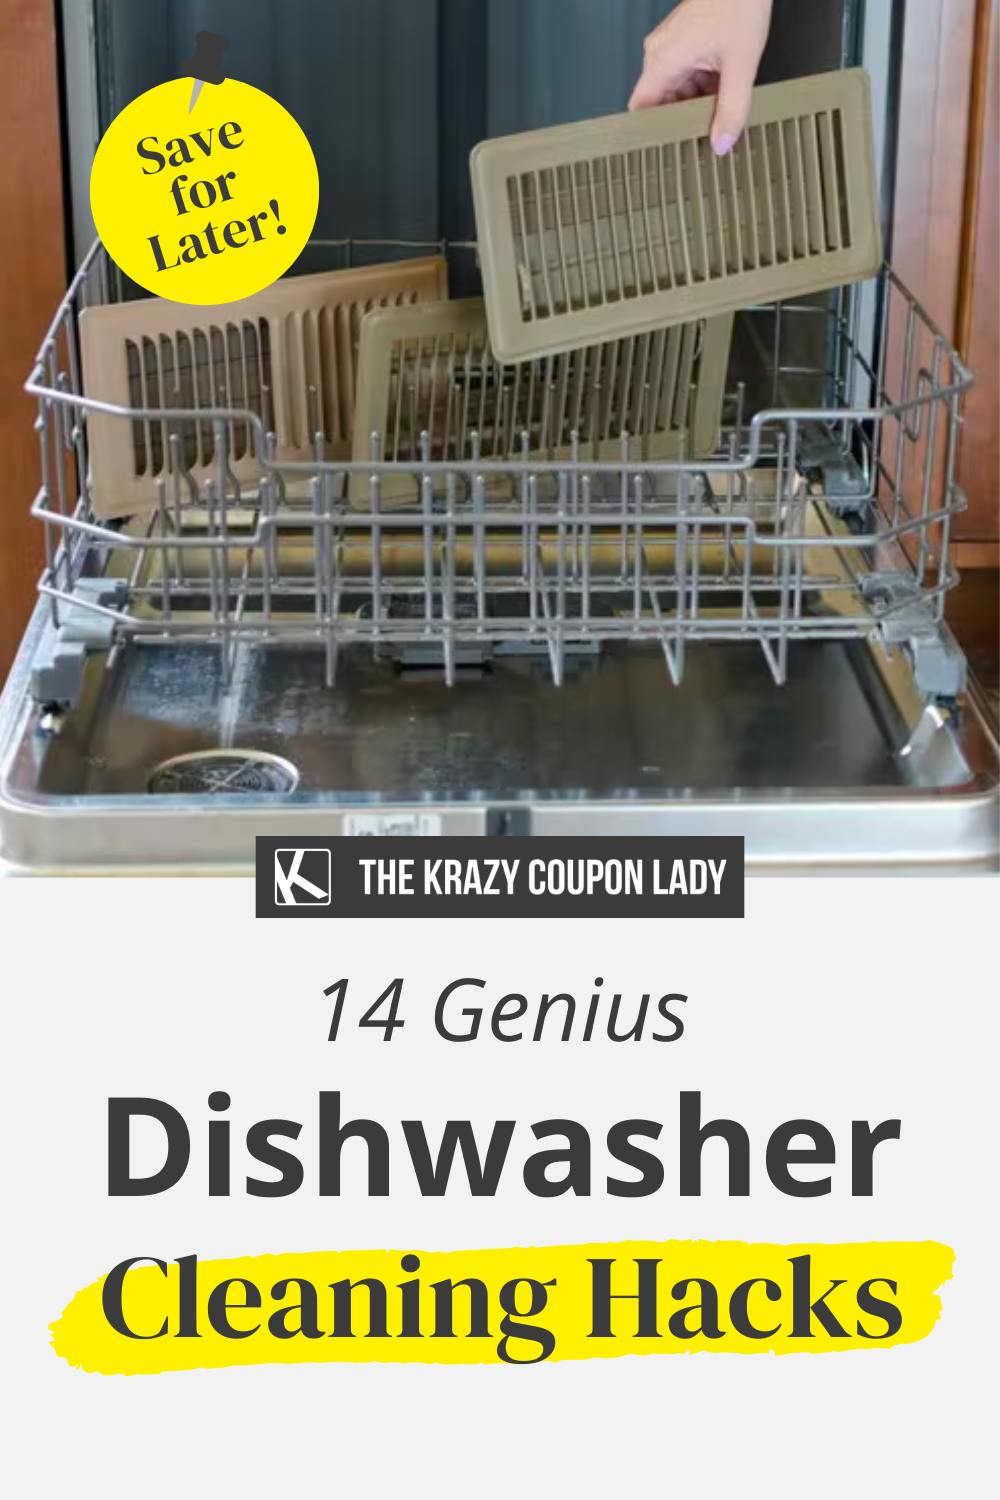 14 Unexpected Dishwasher Hacks to Clean Everything